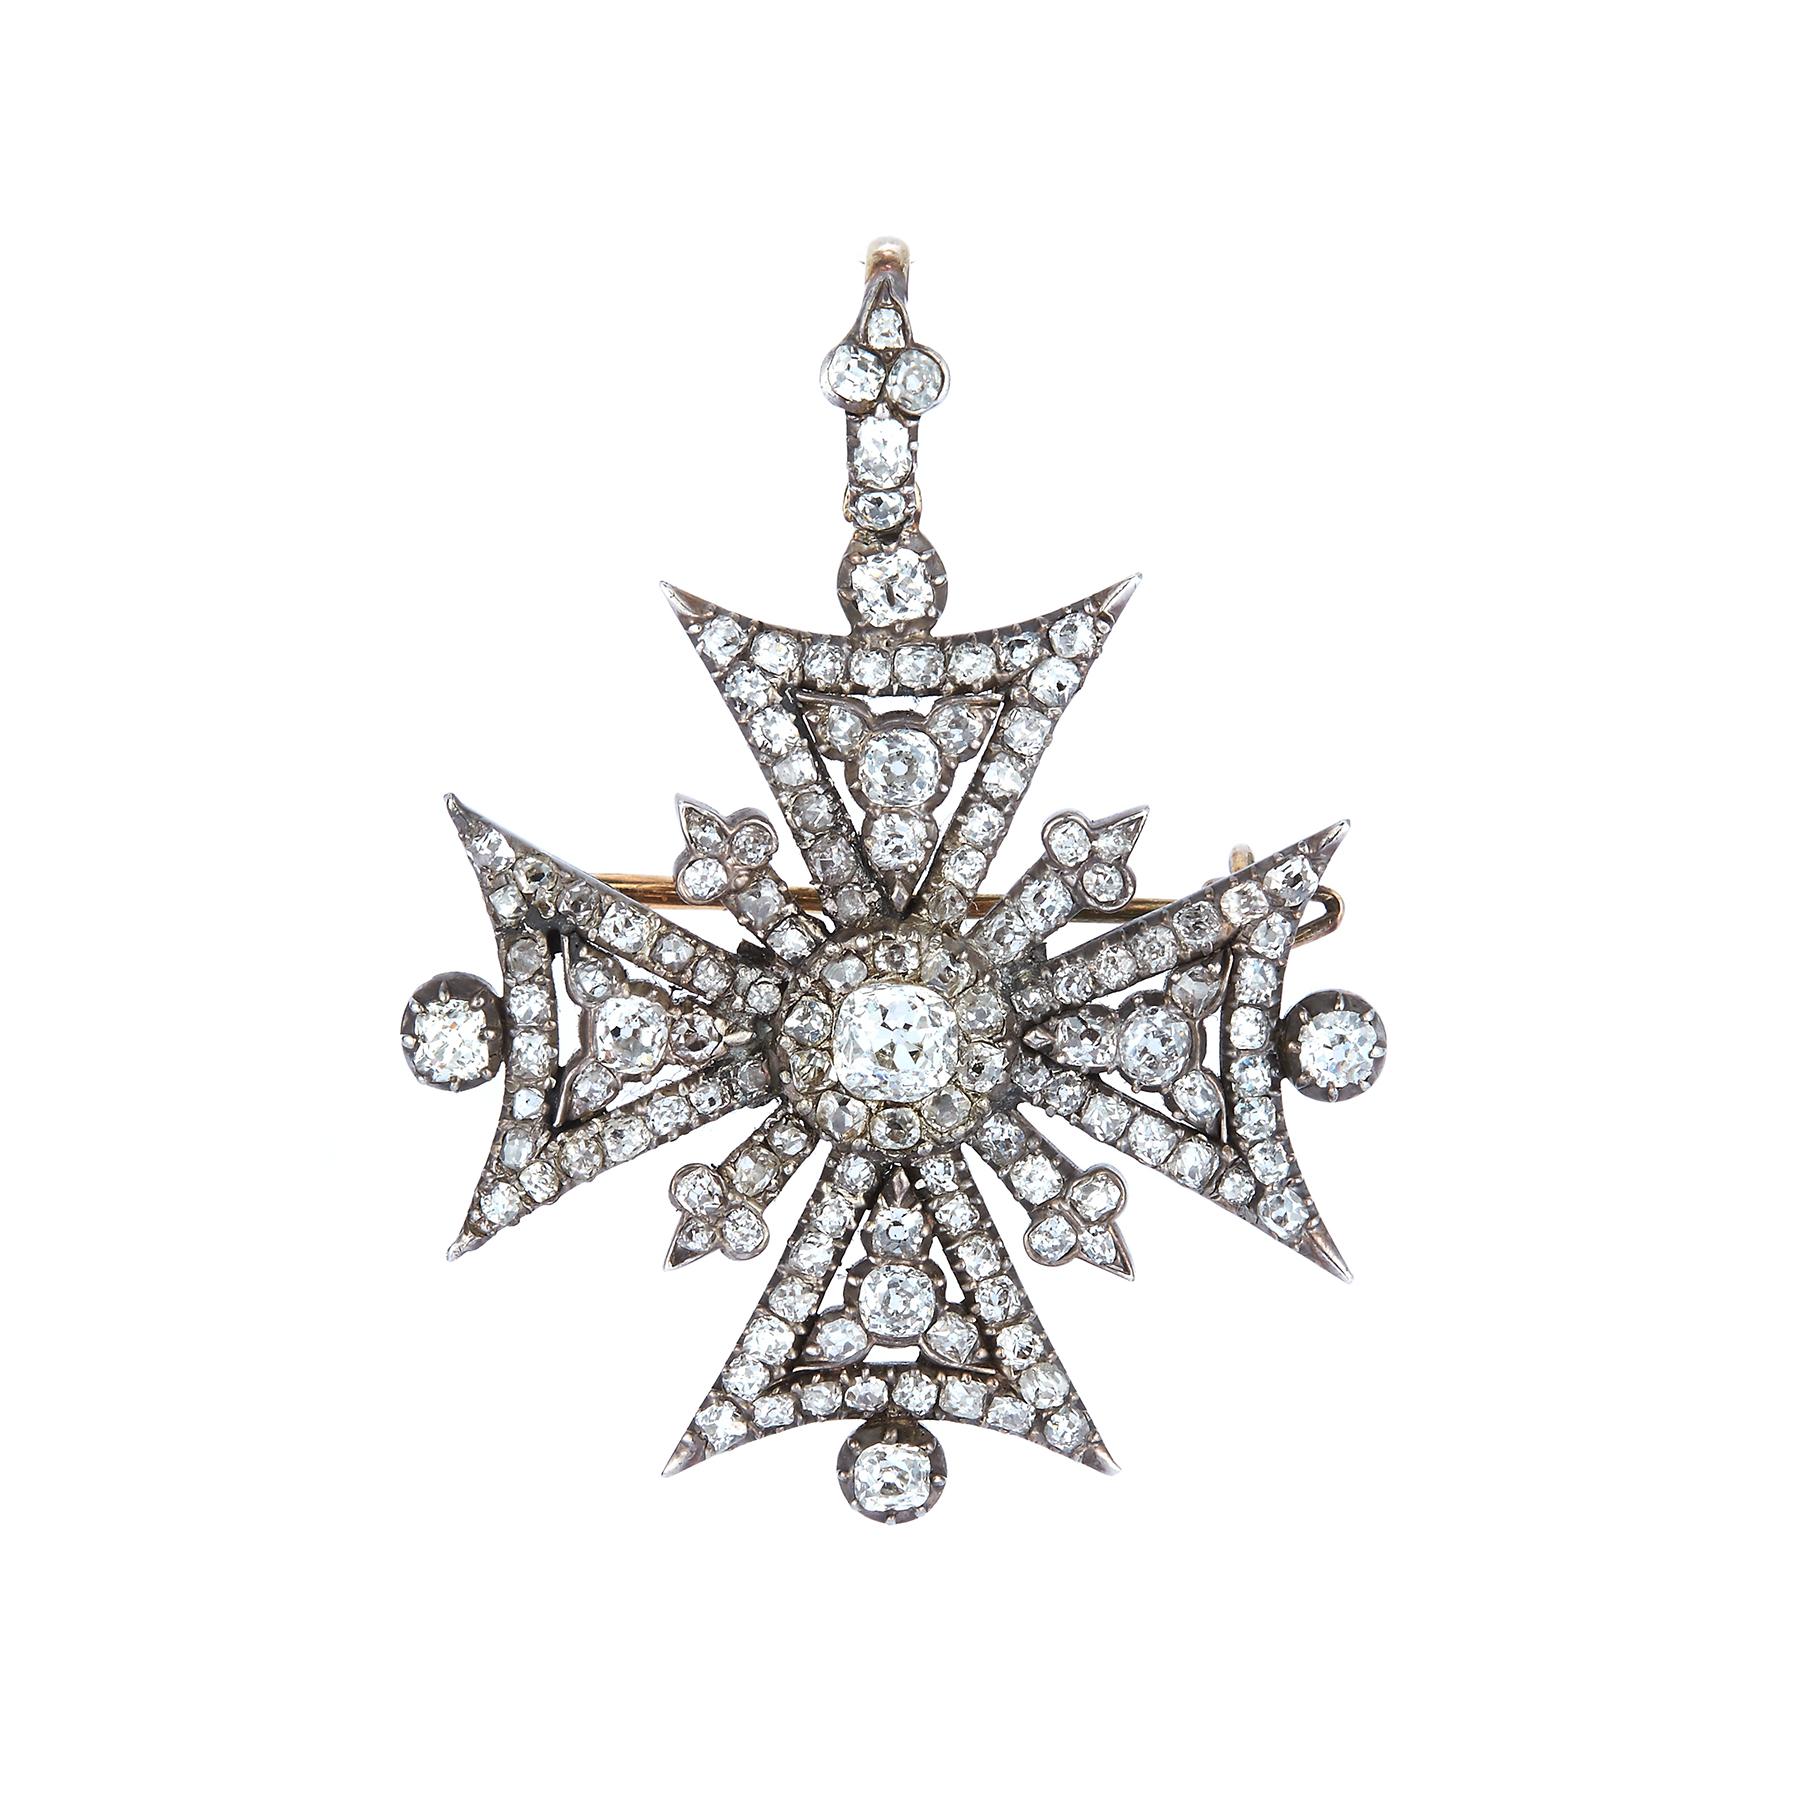 Early Victorian Maltese Cross Diamond Brooch

A stunning early Victorian diamond maltese cross brooch, with a brilliant-cut diamond in the center, and with four arms widening from the base with smaller arms between, set throughout with old